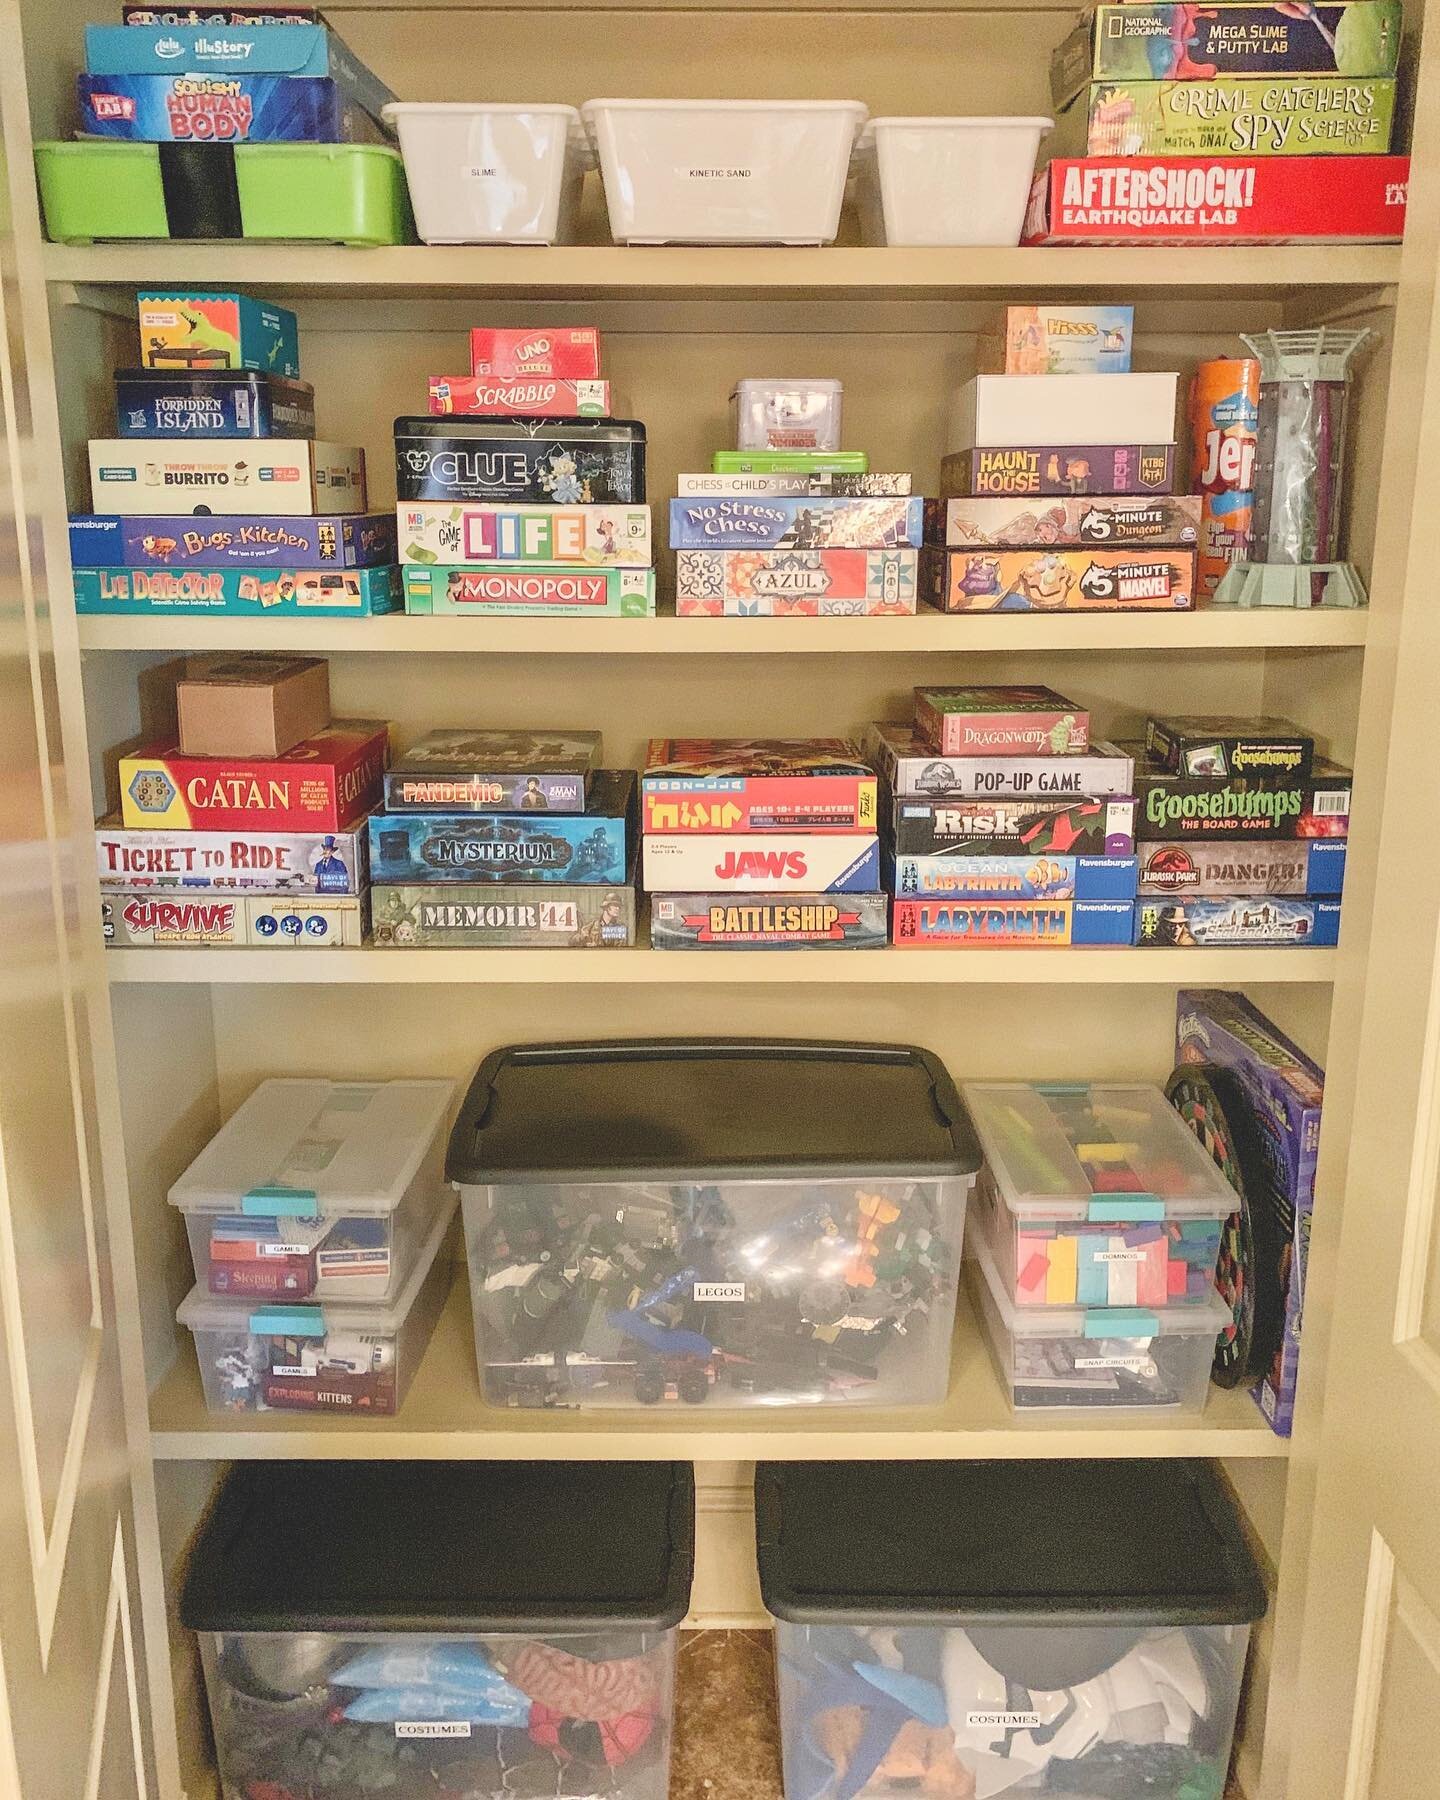 The play closet is under control with bins, labels and designated shelves! Clean up will be a breeze with this family&rsquo;s new system!